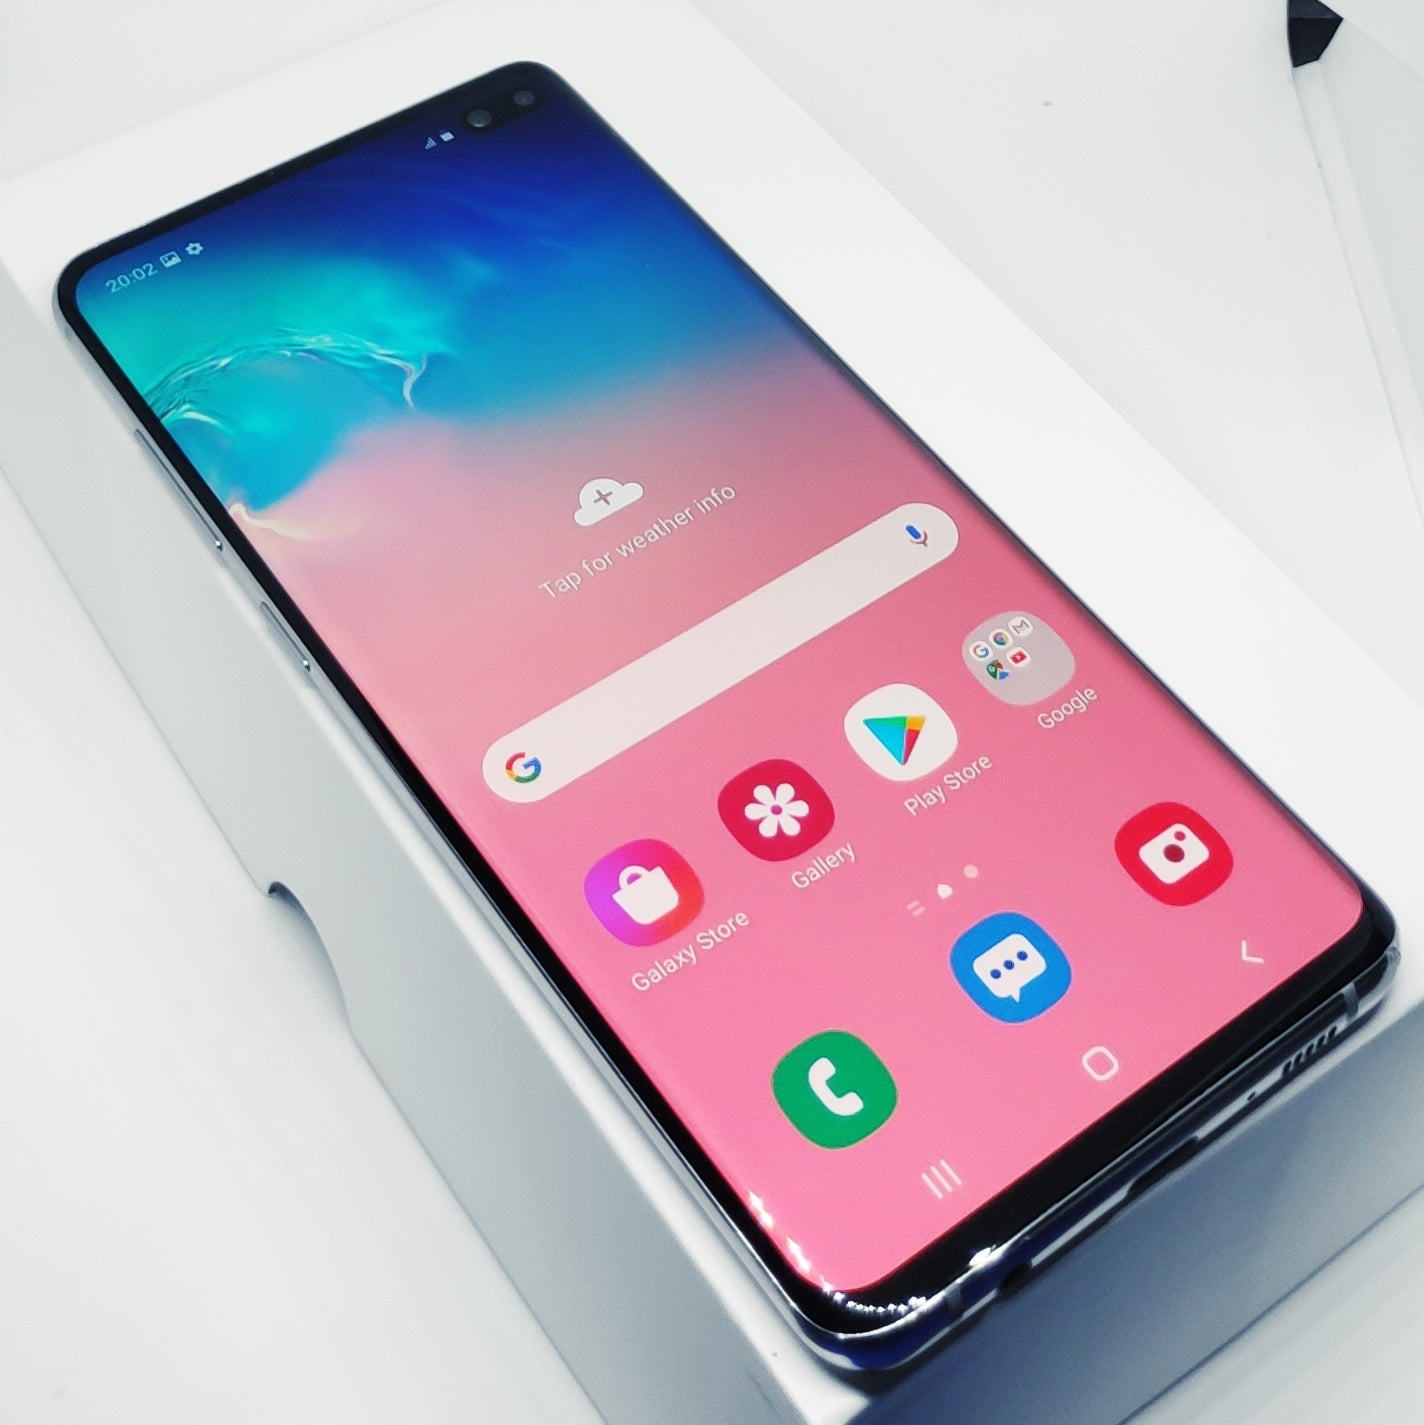 Samsung Galaxy S10 Plus Blue 128GB (Like New) With New Case, Glass Screen Protector & Shipping